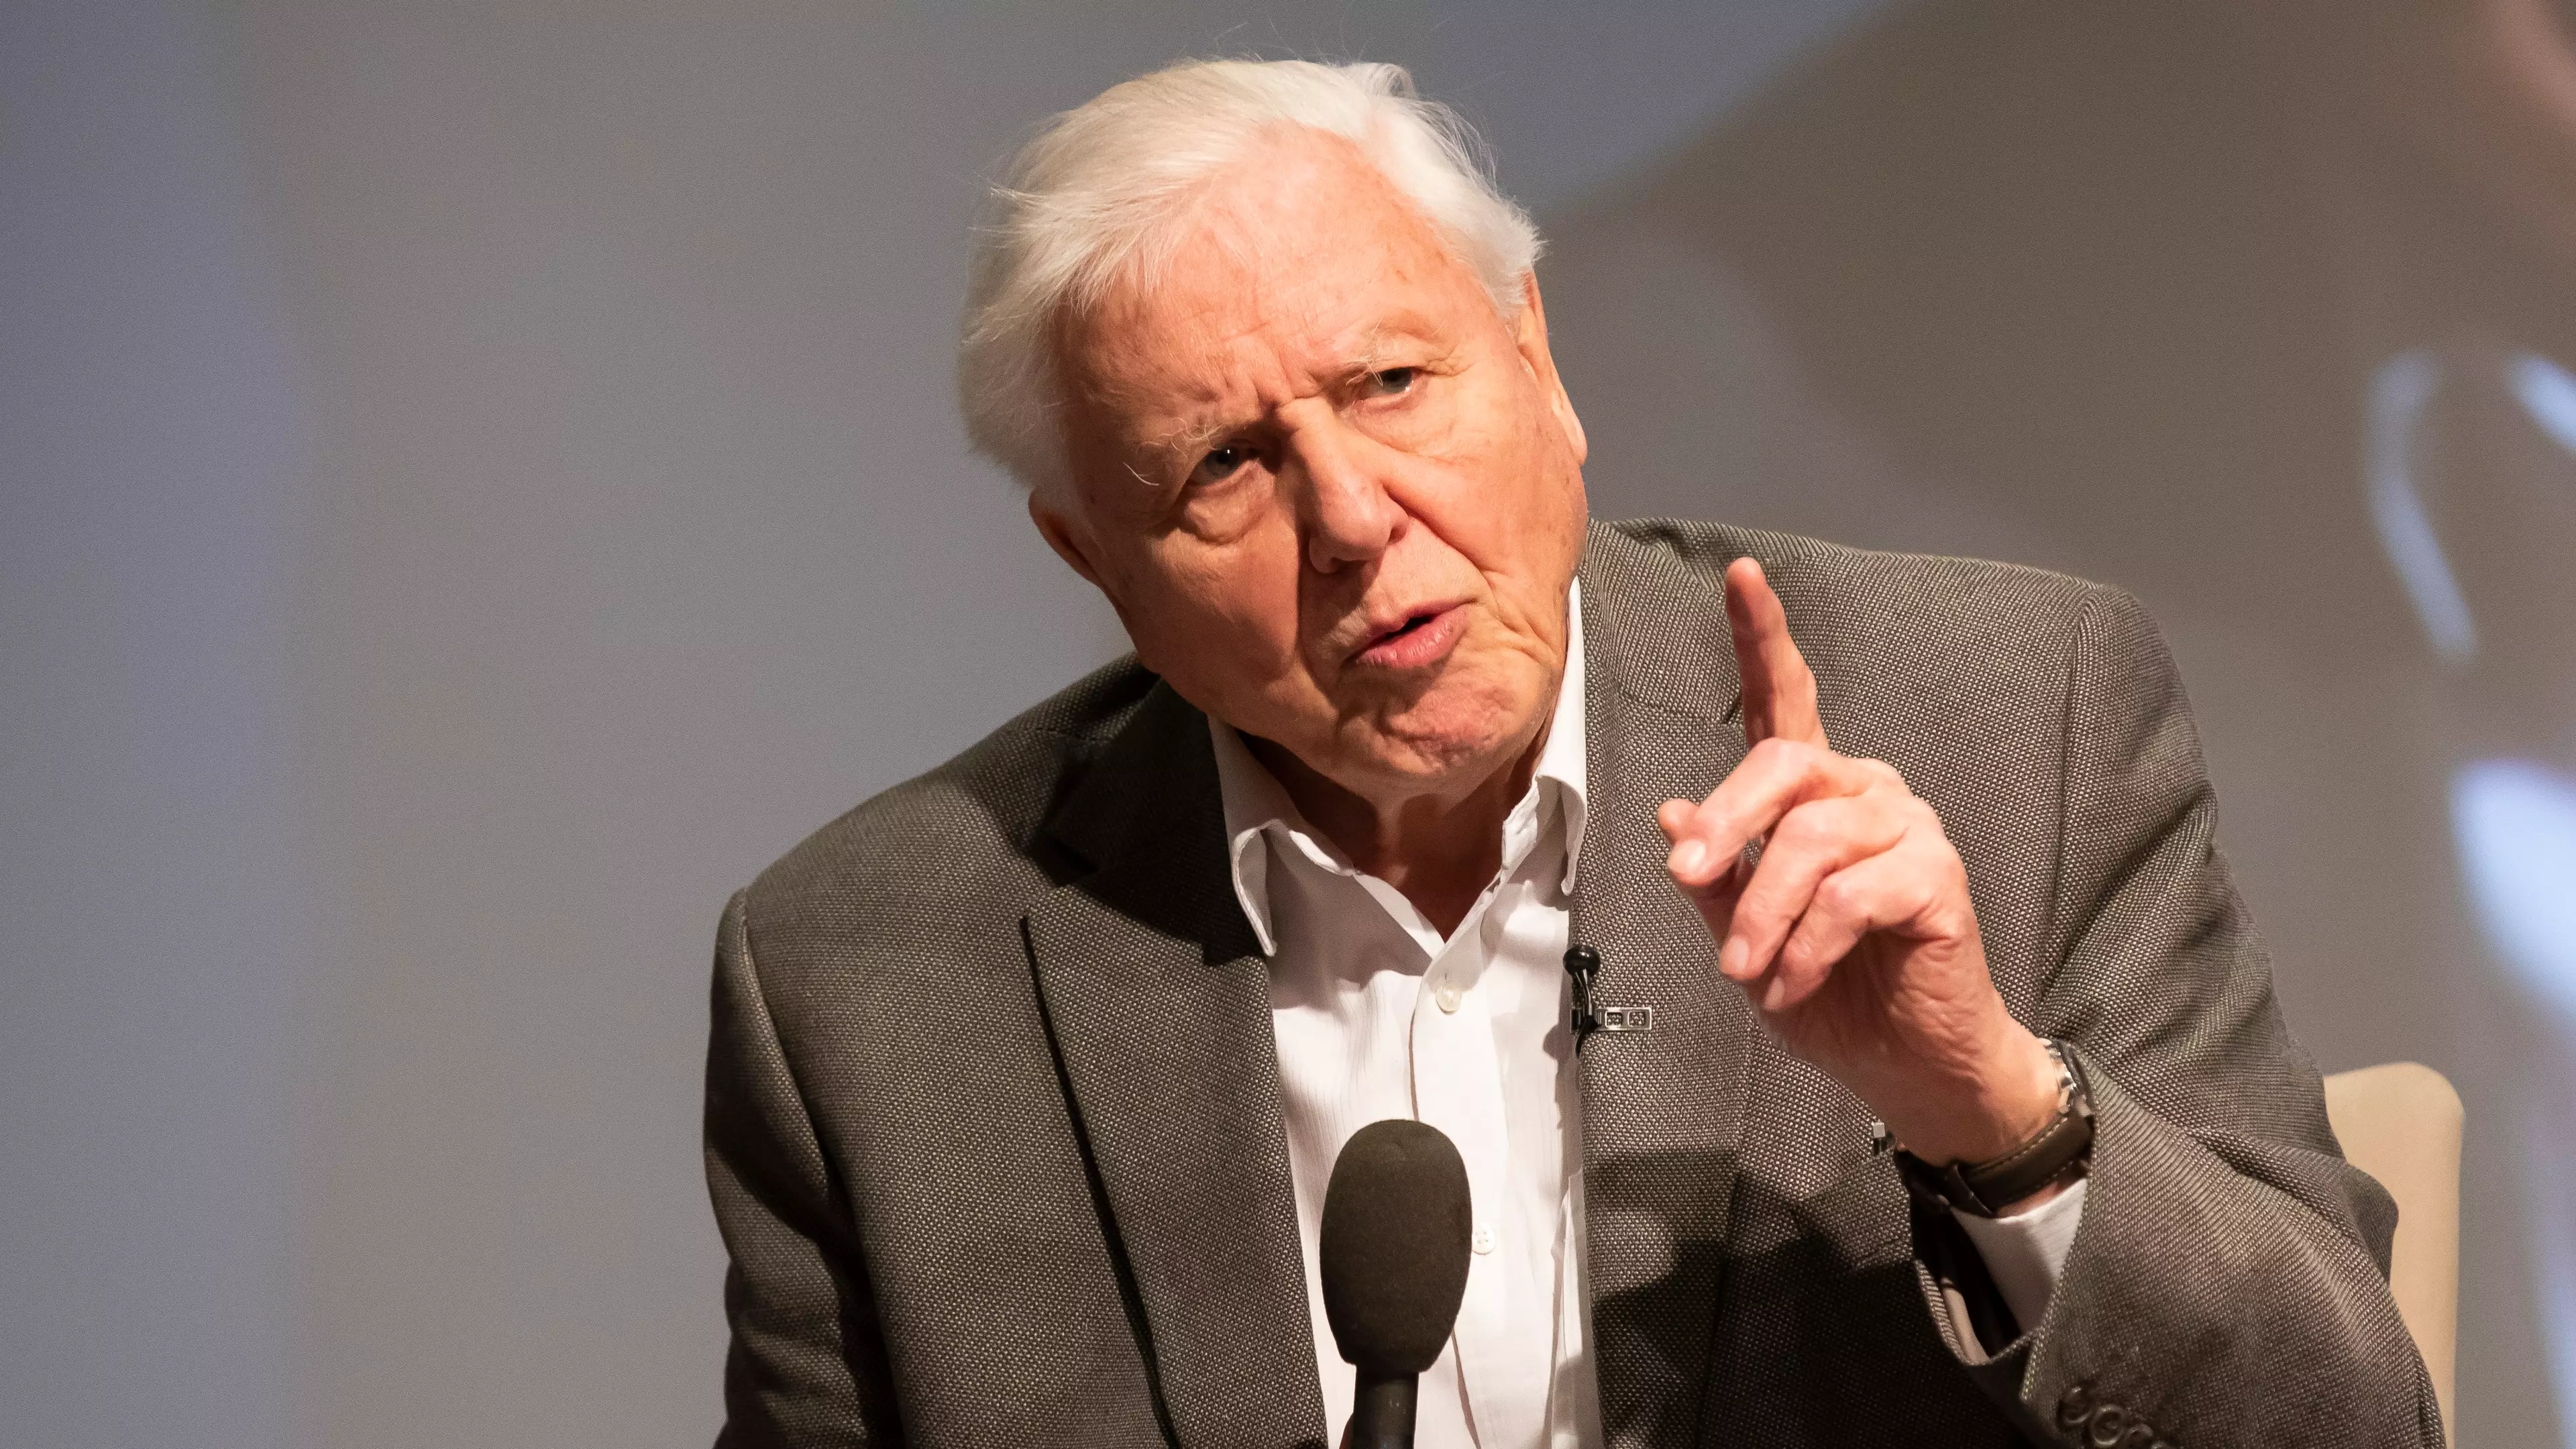 Sir David Attenborough Sets World Record After Joining Instagram